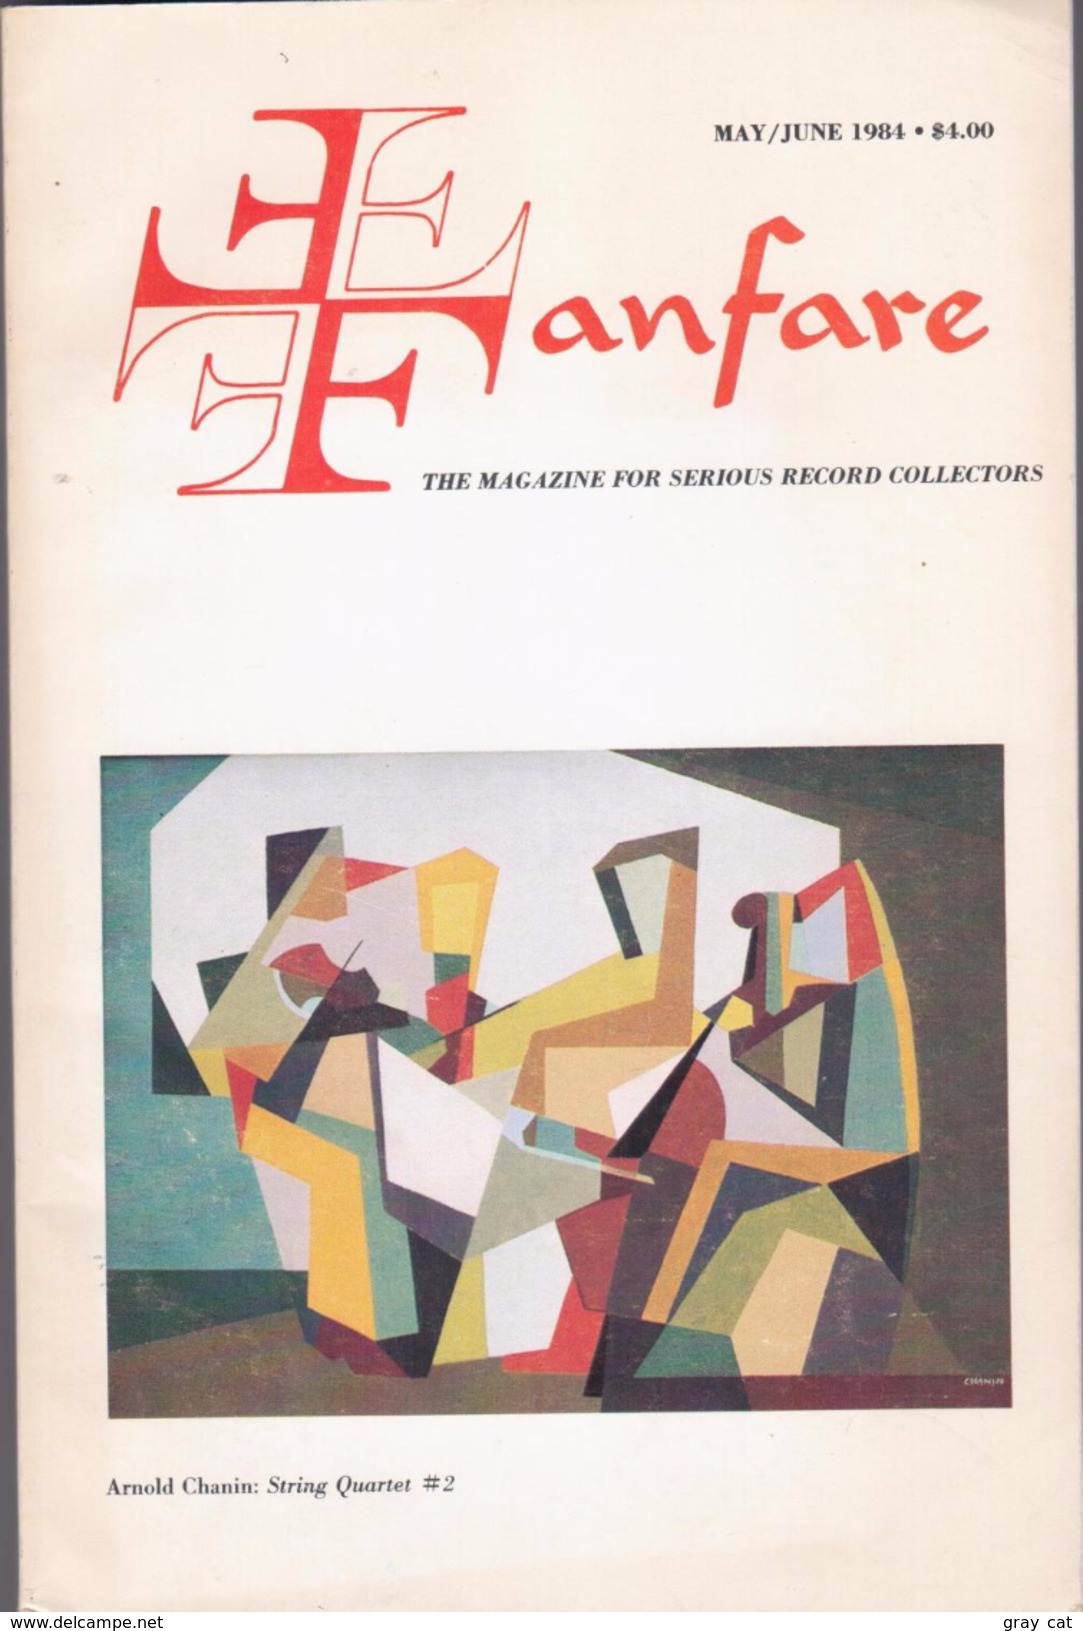 Fanfare, The Magazine For Serious Record Collectors, Vol. 7, No. 5, May/June 1984 - Divertissement